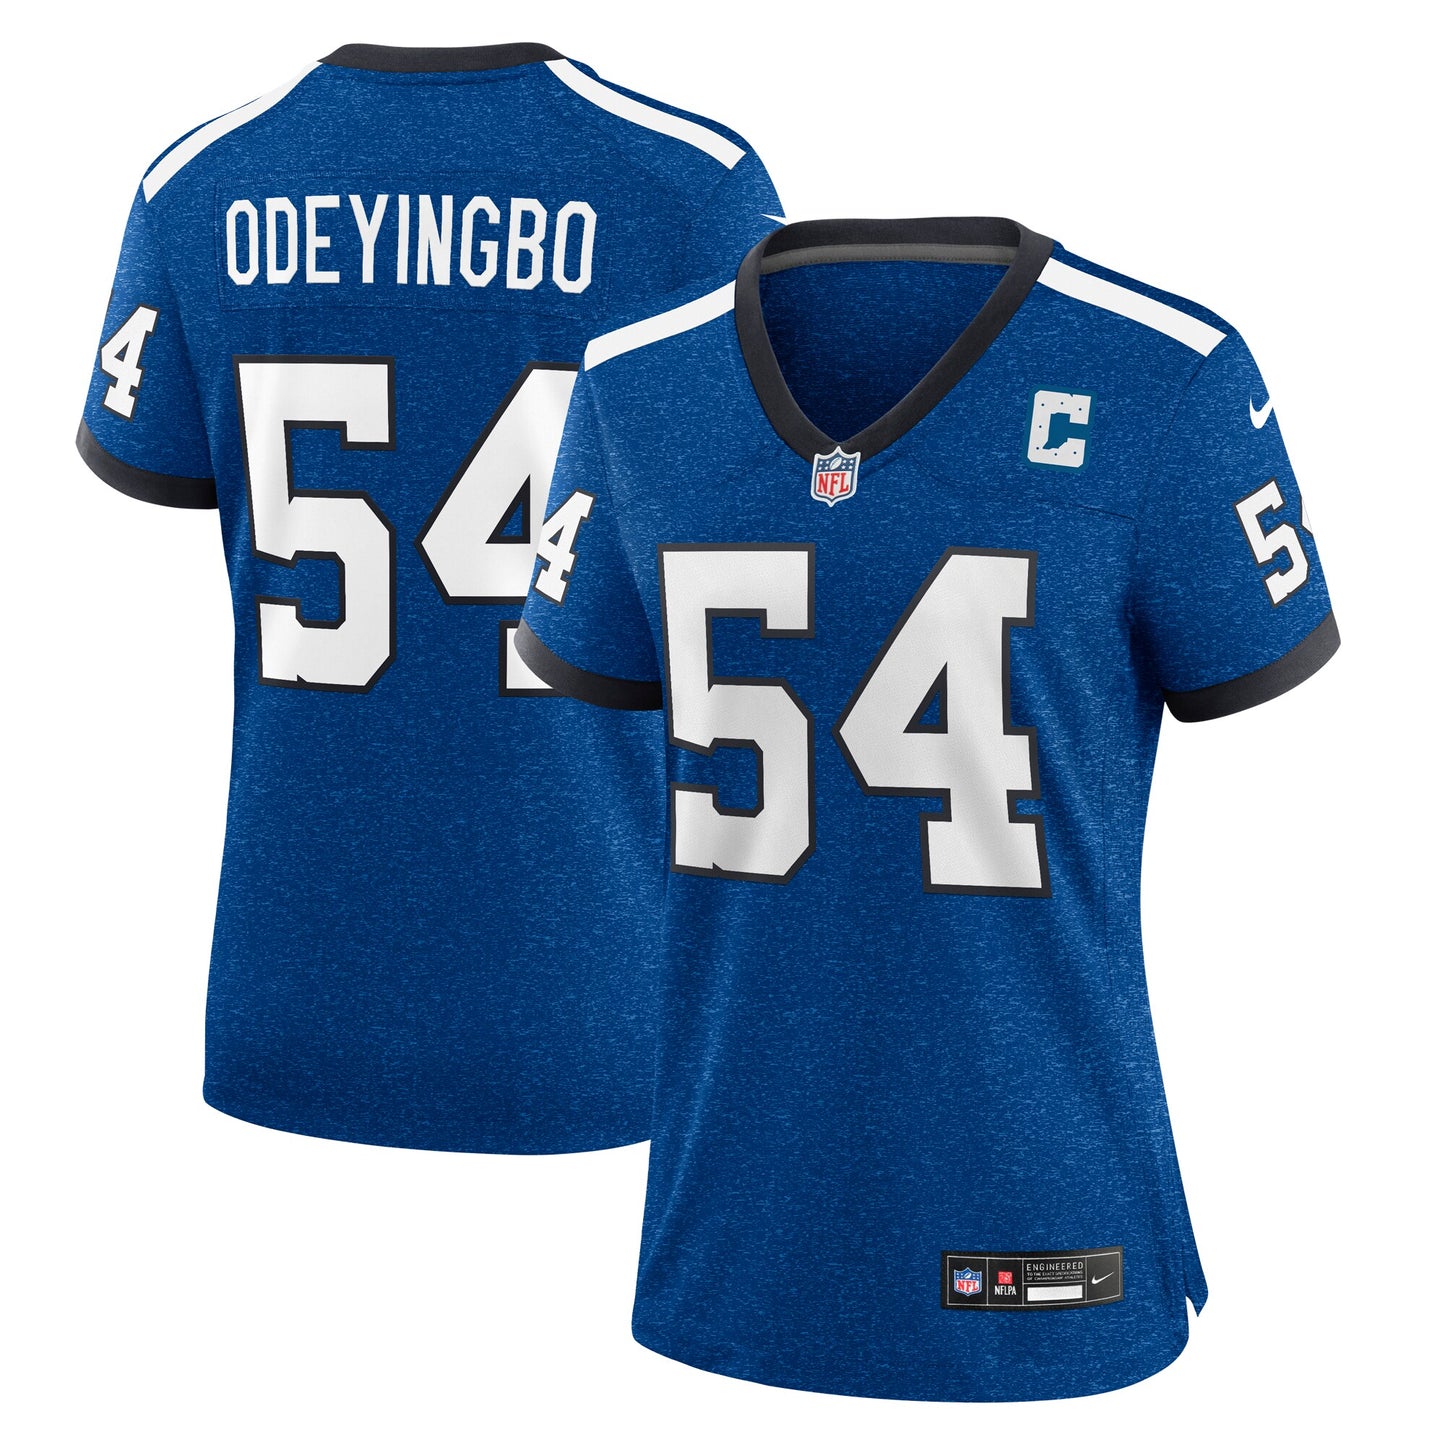 Dayo Odeyingbo Indianapolis Colts Nike Women's Indiana Nights Alternate Game Jersey - Royal